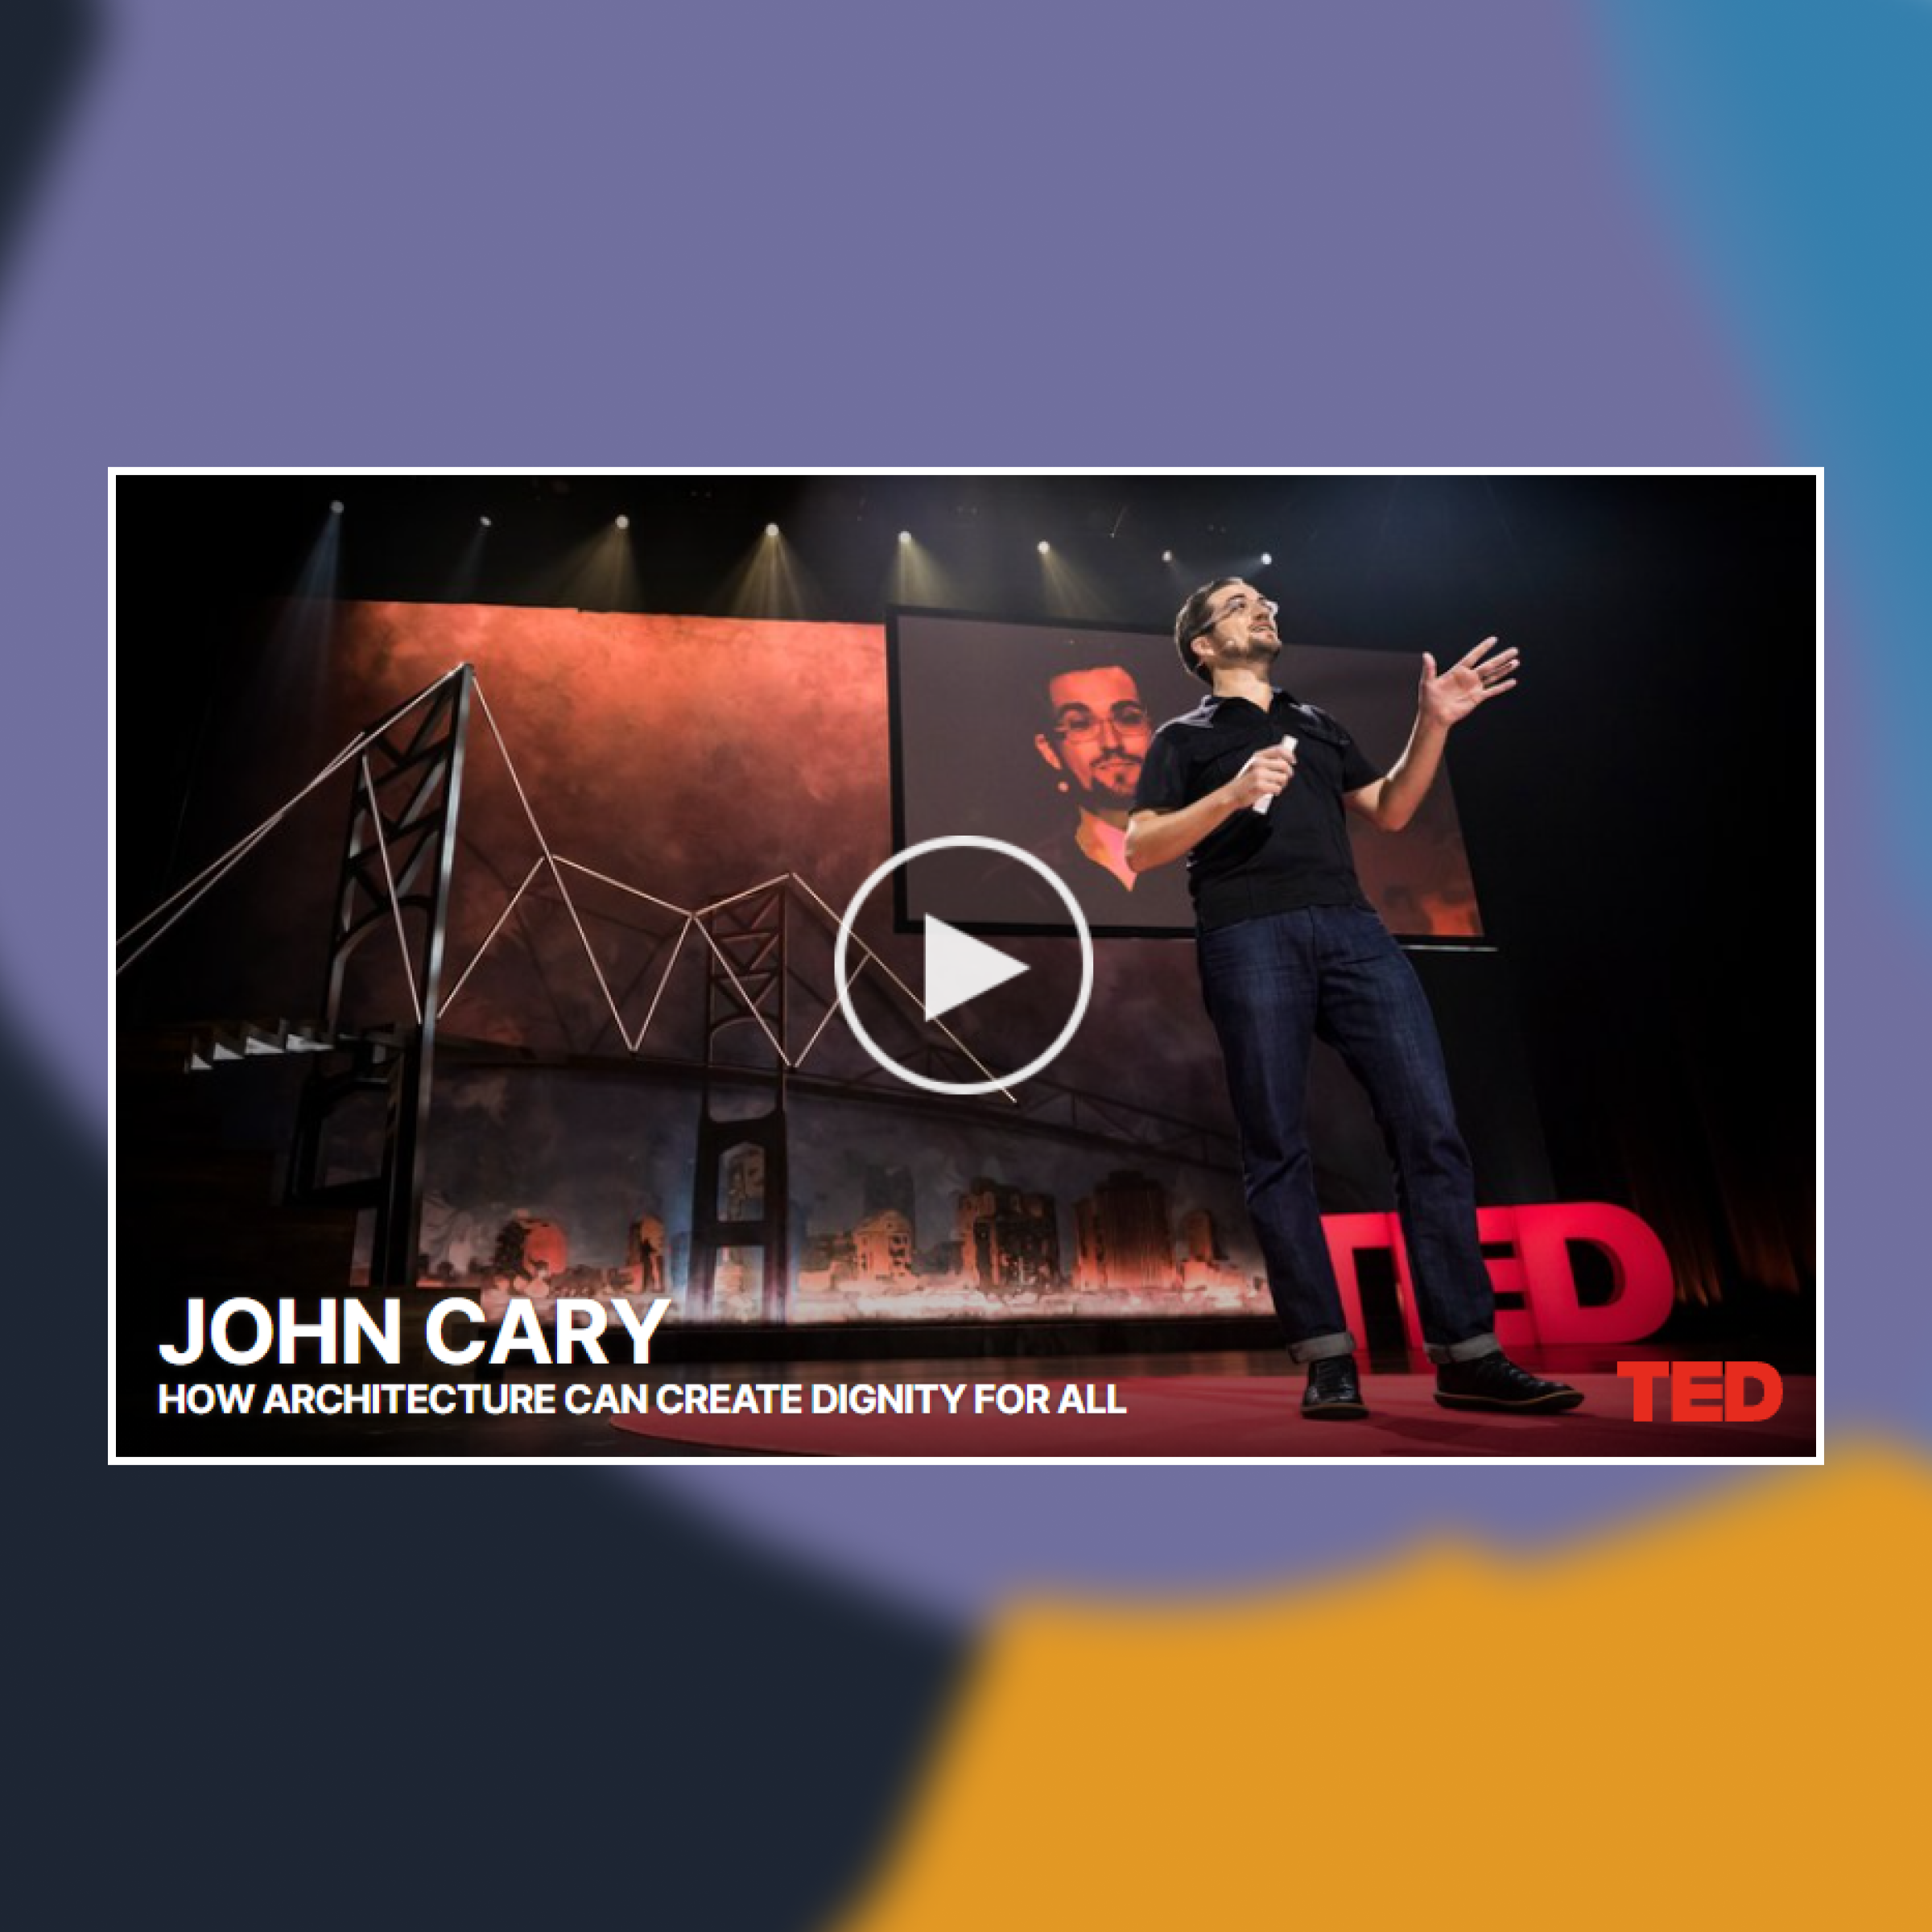 Cover shot of John Cary's TED talk against an abstract painted background